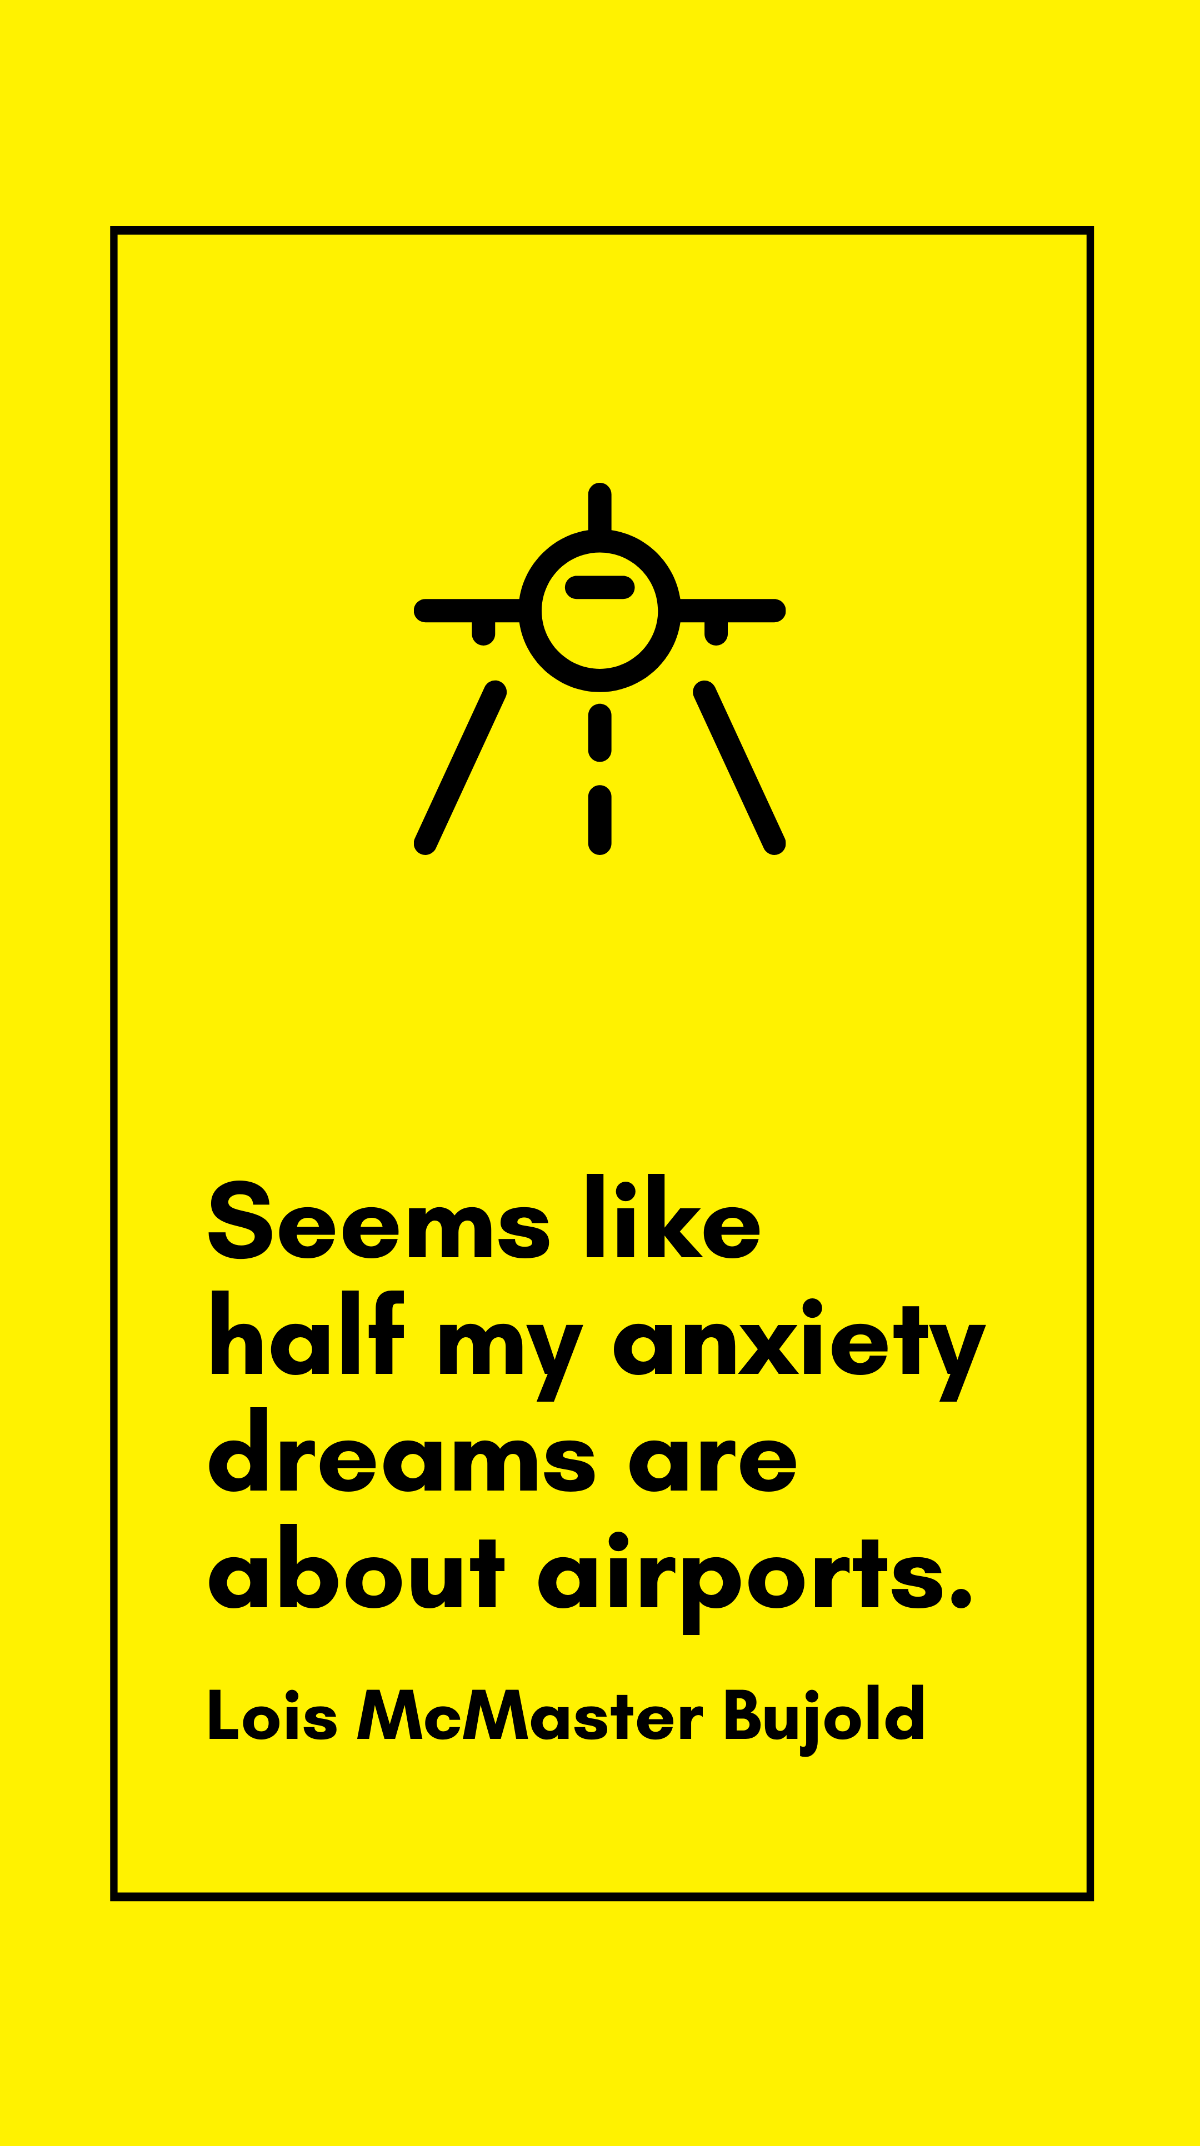 Free Lois McMaster Bujold - Seems like half my anxiety dreams are about airports. Template